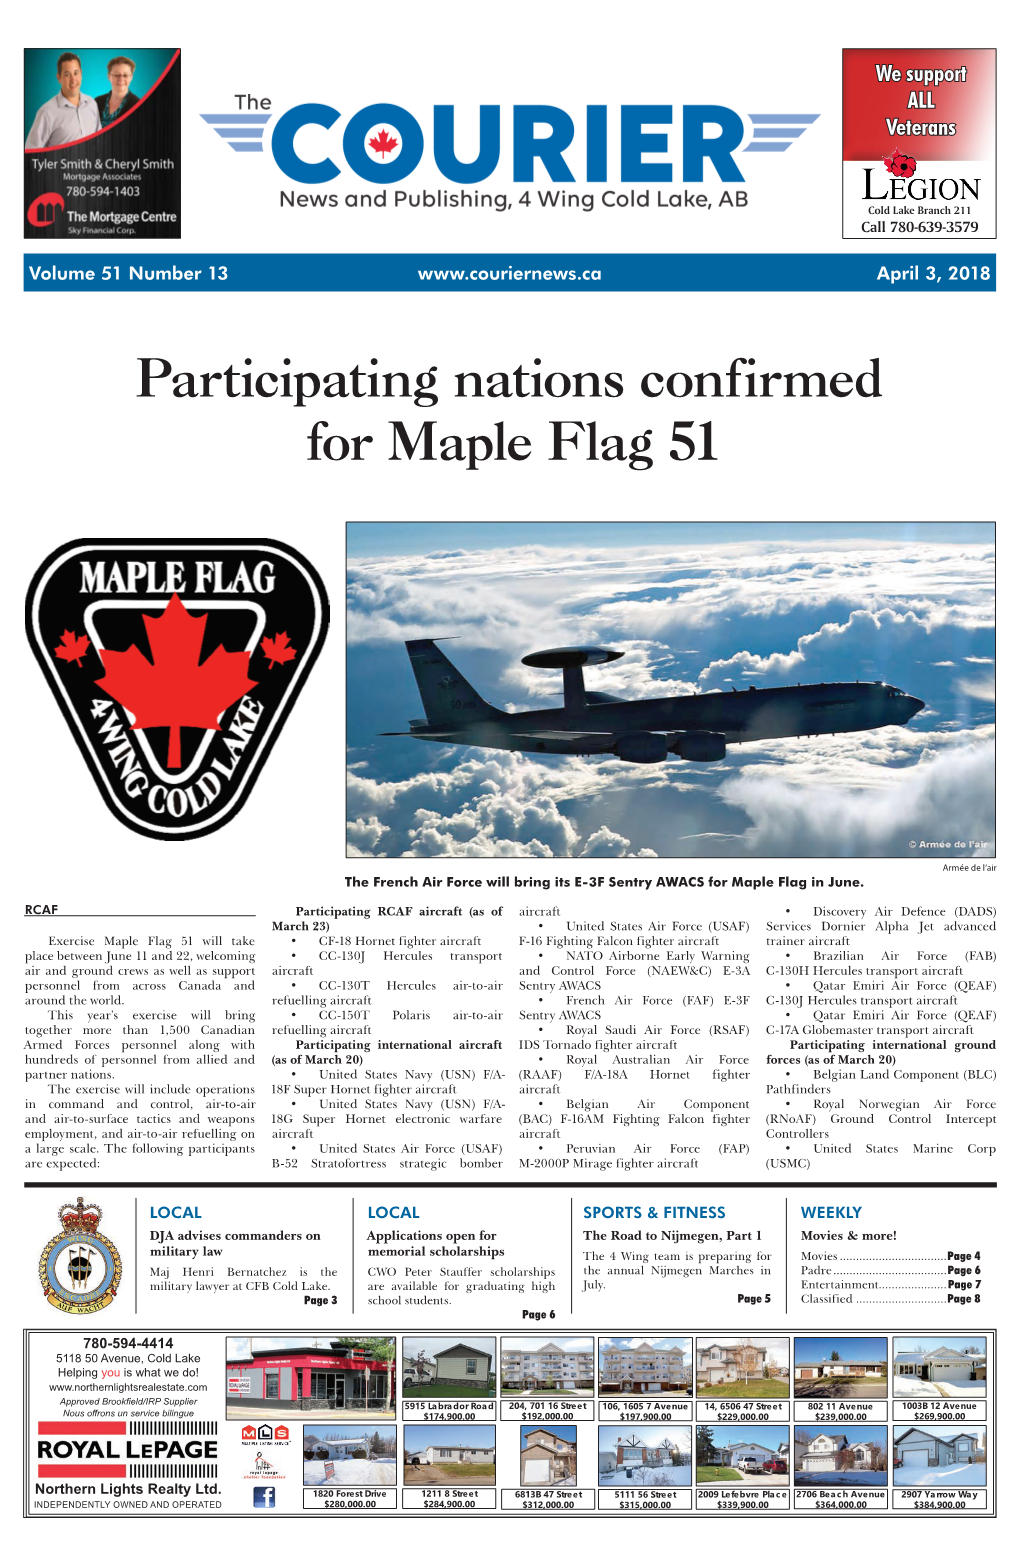 Participating Nations Confirmed for Maple Flag 51